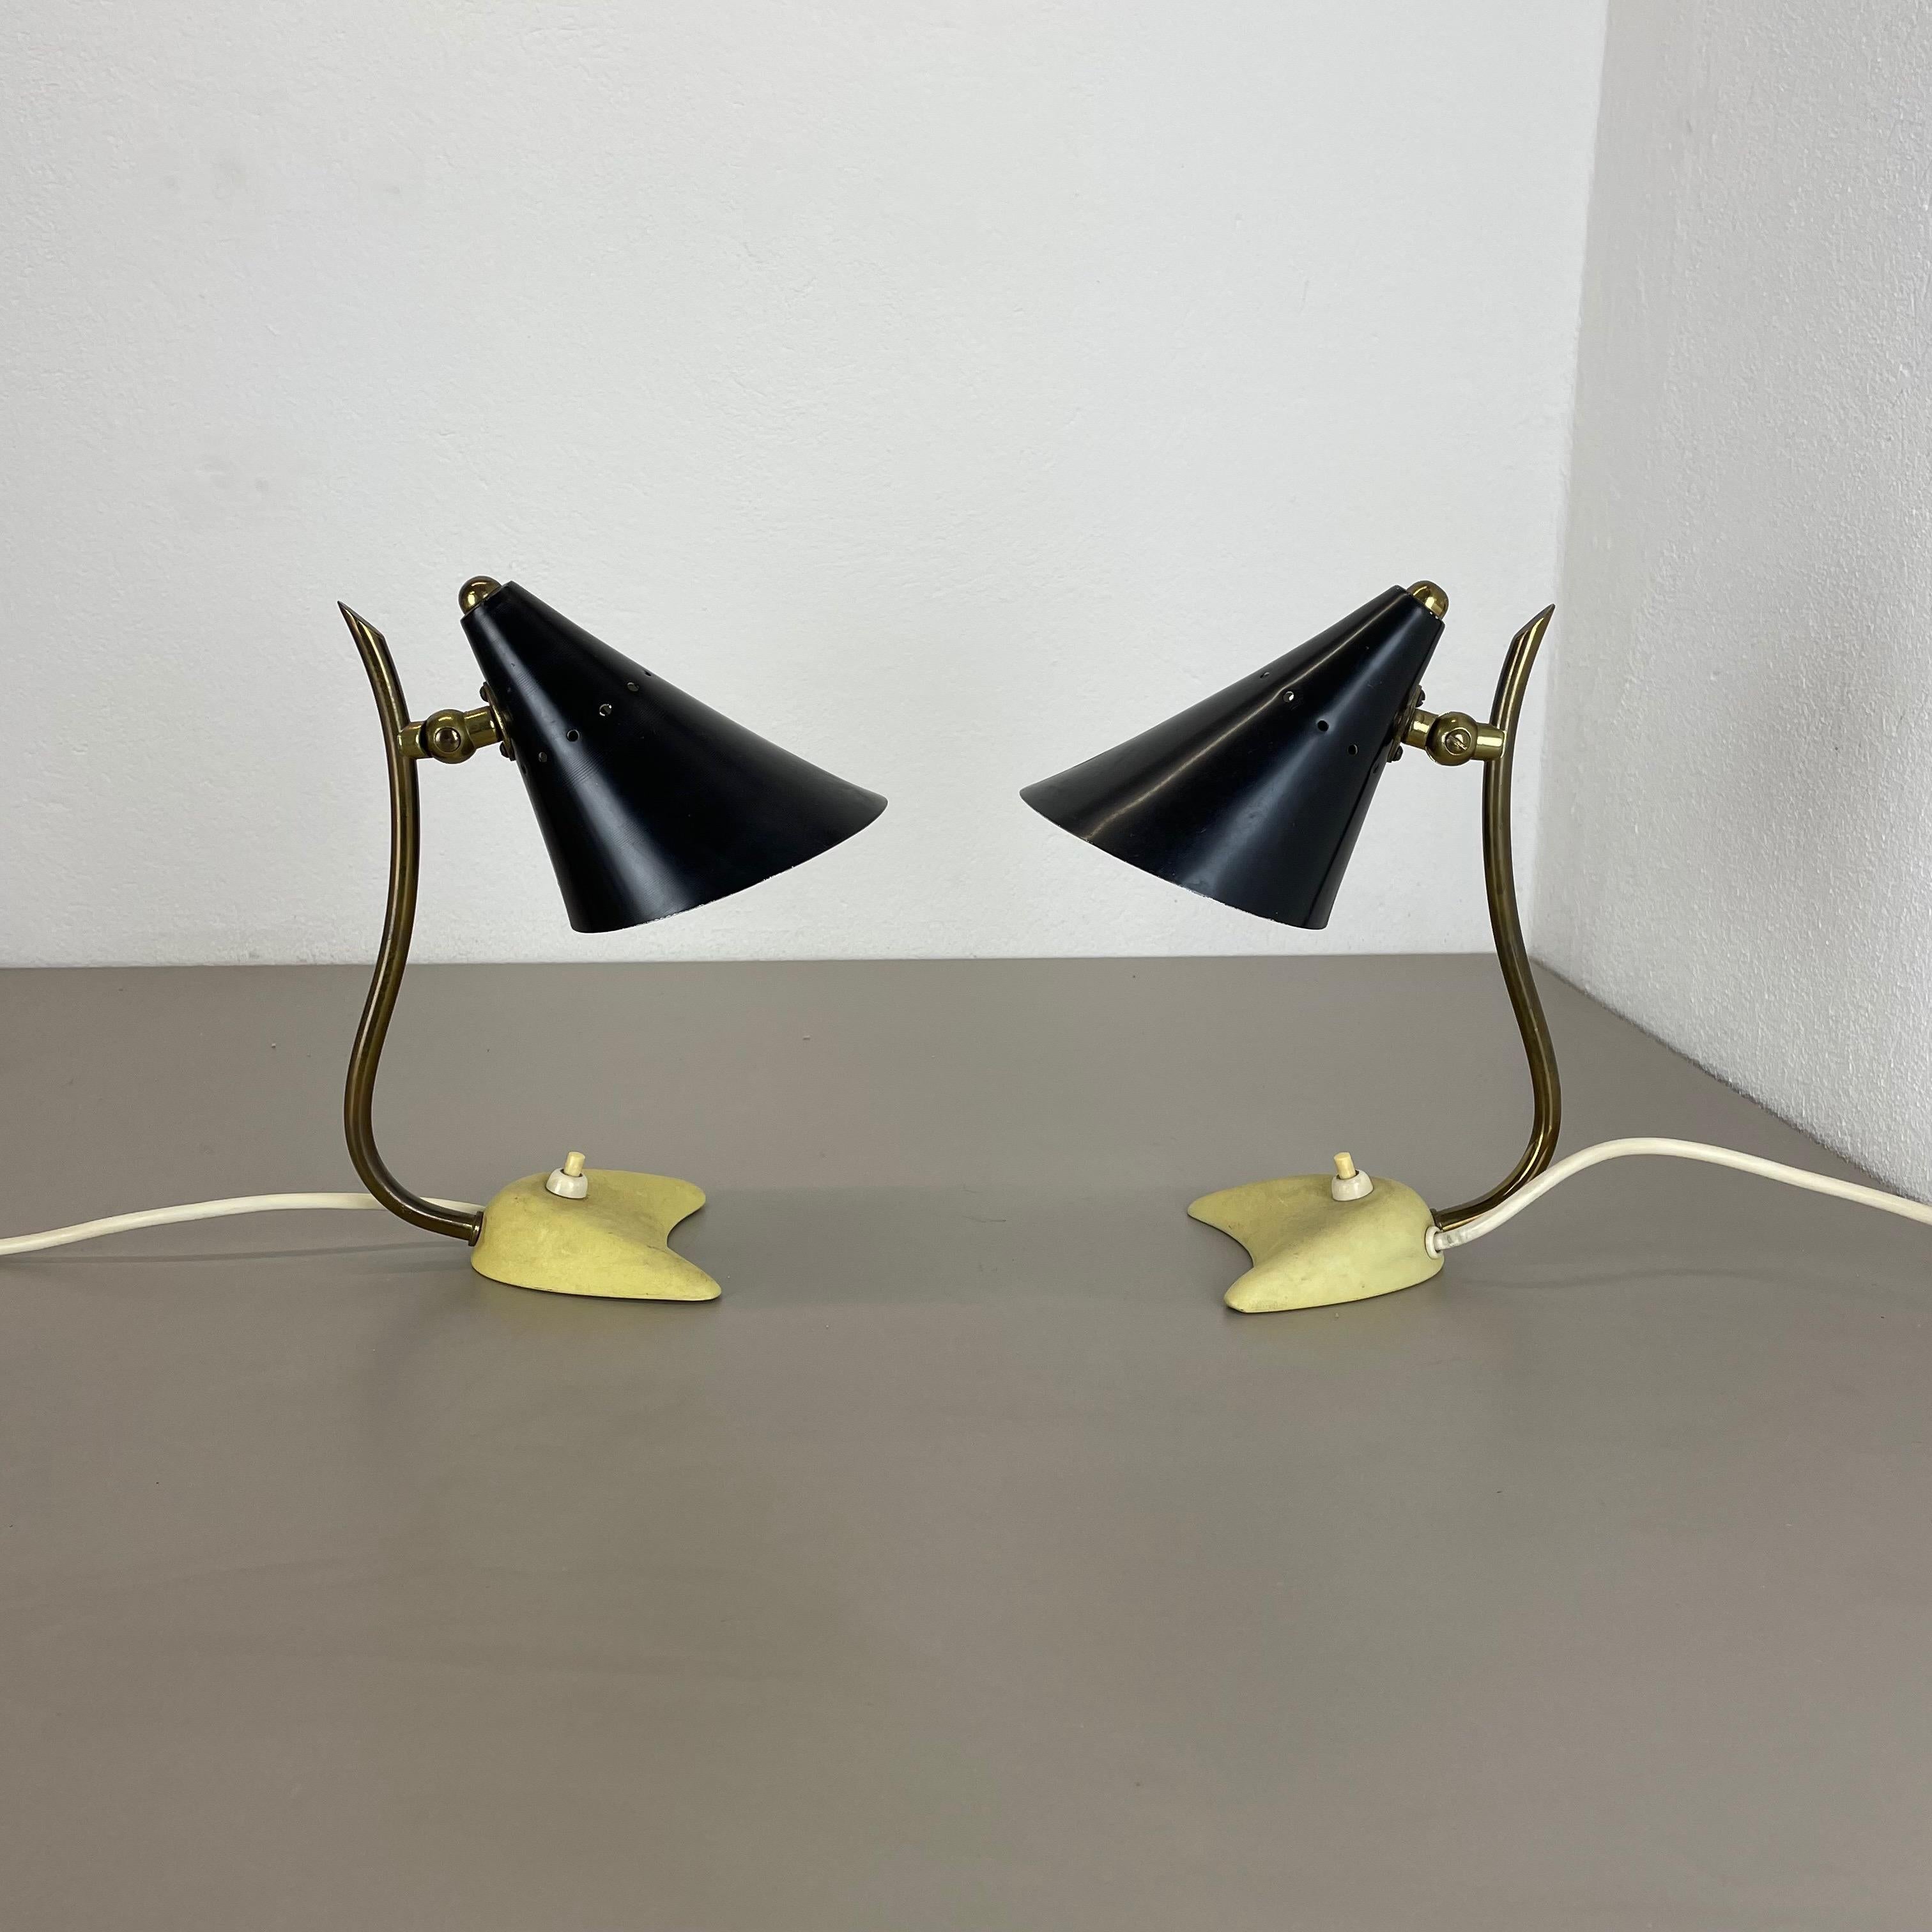 Article:

Modernist metal brass table light set of 2


Origin:

Italy


Decade:

1950s





This original vintage light set was designed and produced in the 1950s in Italy. The light is made of metal with a shade in black and stand